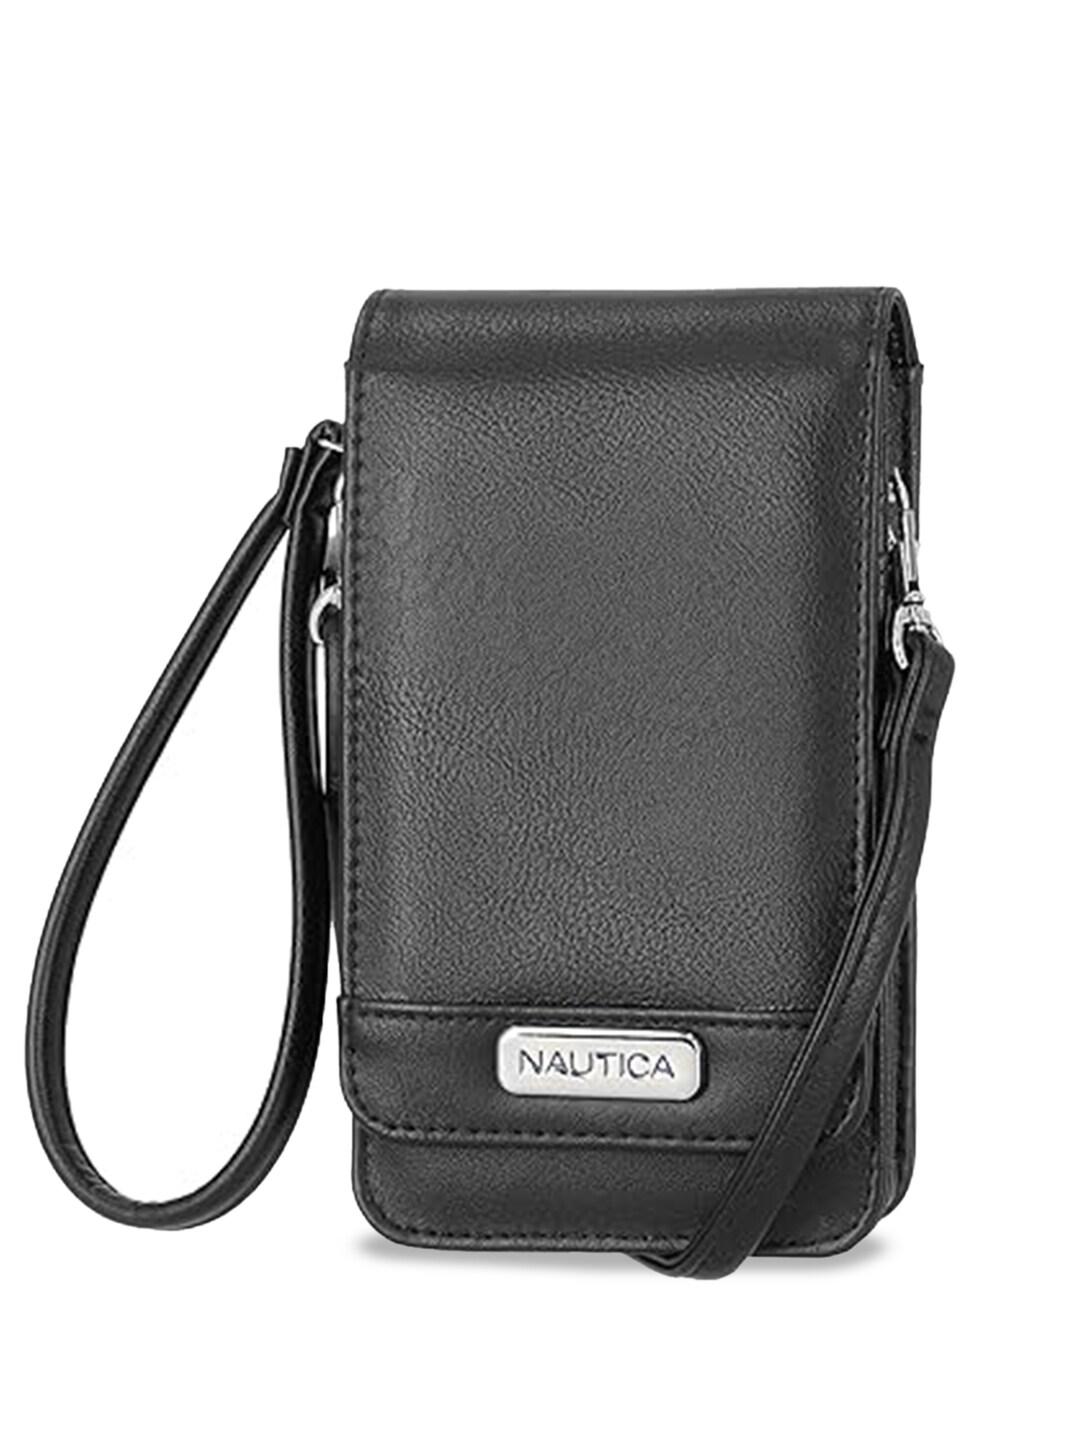 nautica structured sling bag